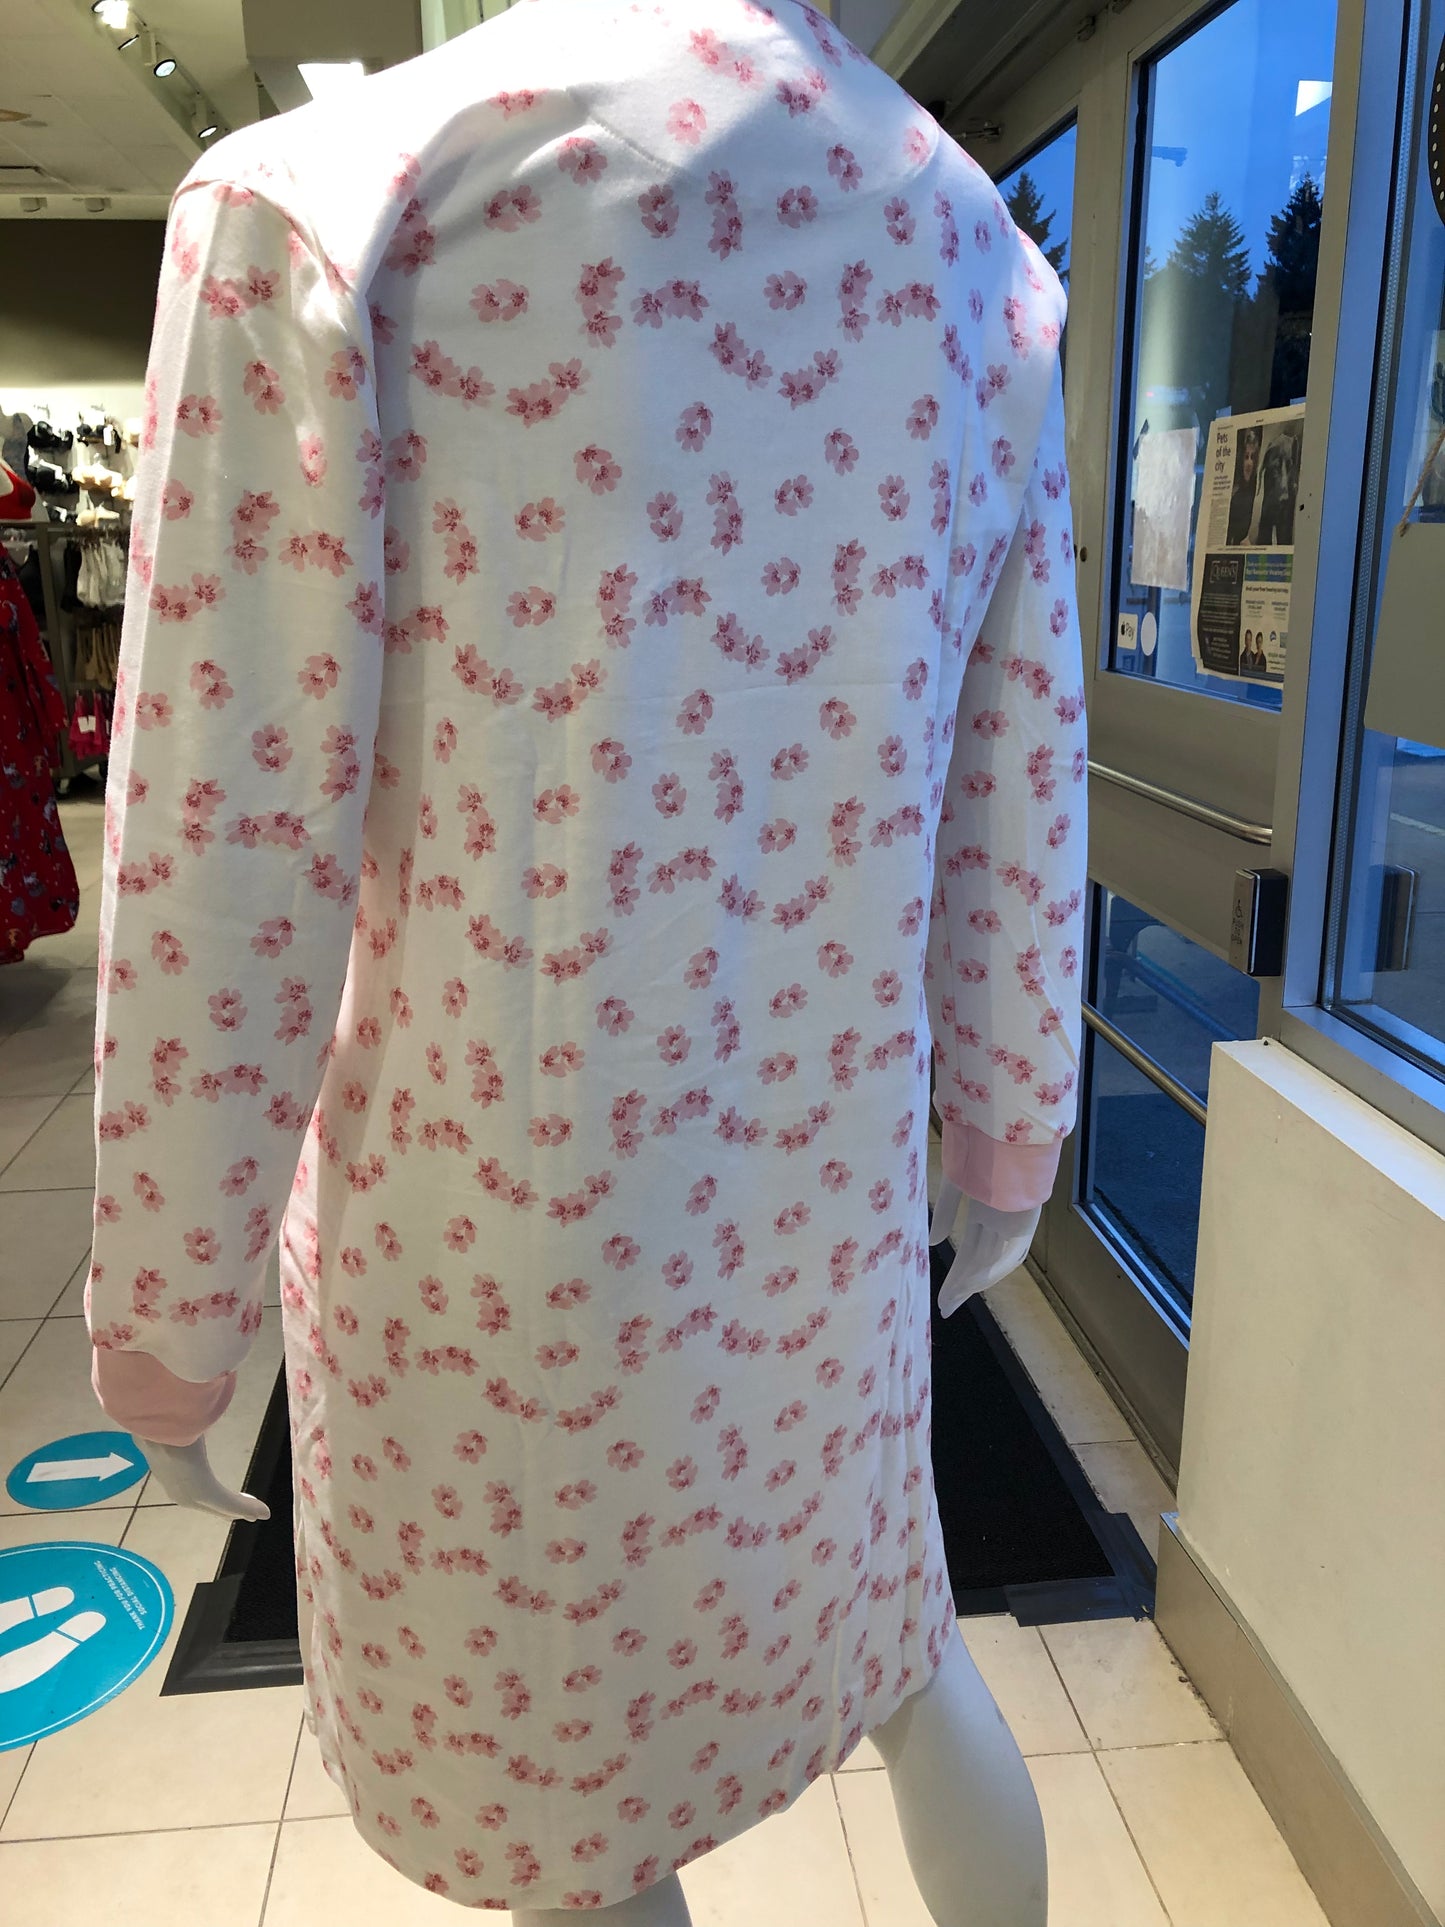 100% Cotton Long Sleeve Nightgown 51203 - Rosa